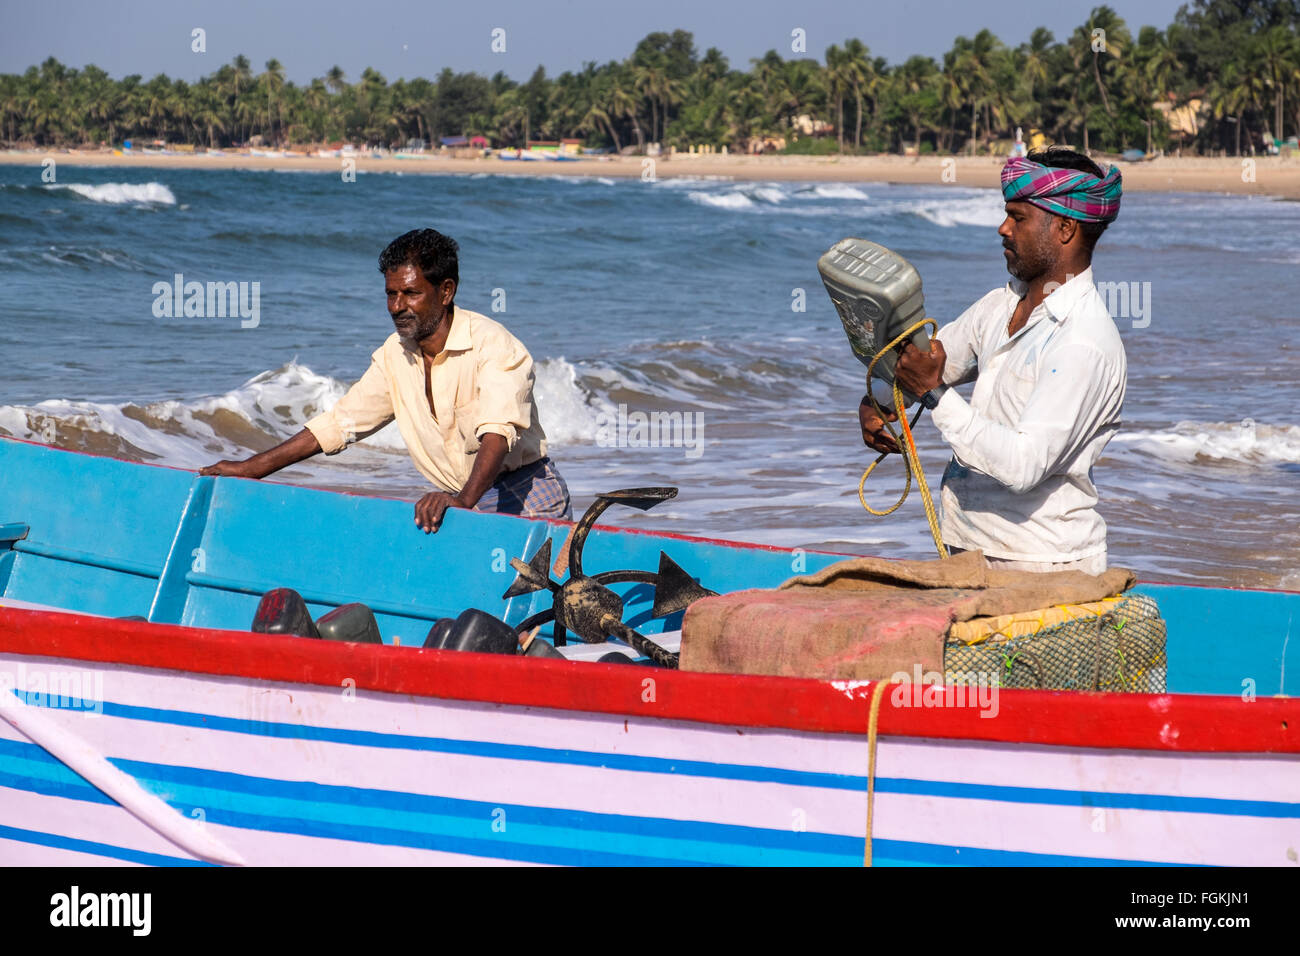 Fishermen preparing to go out in their boats on a beach near Malvan in Maharashtra, southern India Stock Photo